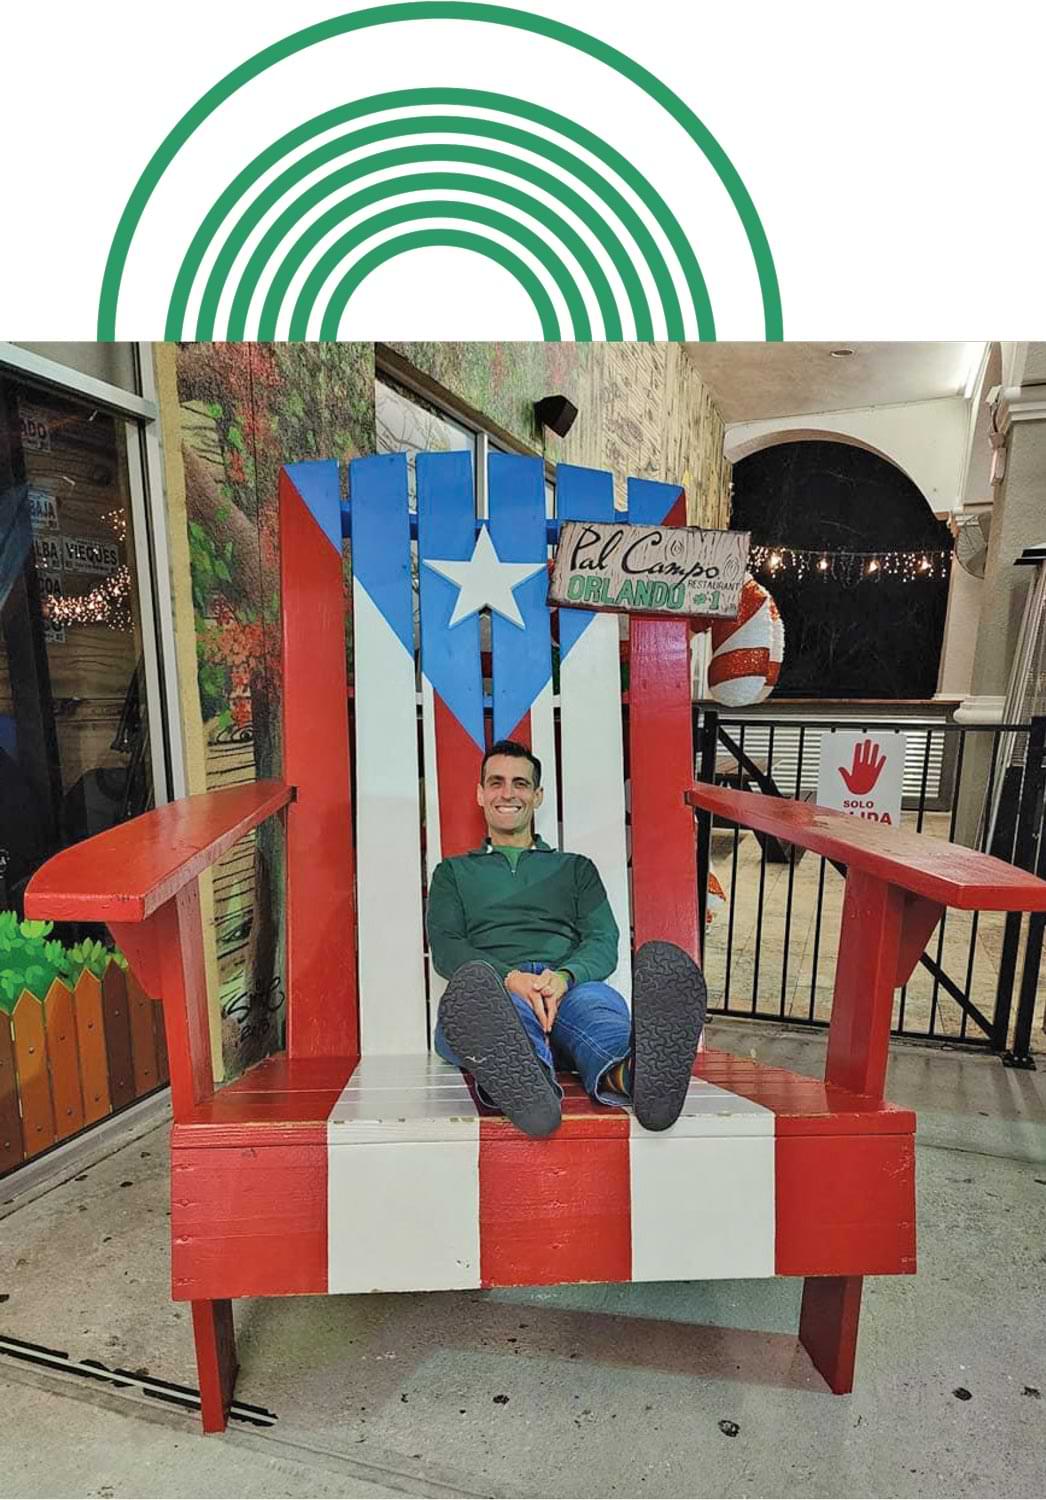 Dr. Omar Farias smiles while sitting back in a oversized wooden adirondack chair painted with the Texas flag and holdig a sign the reads "Pal Campo Restaurant Orlando #1"